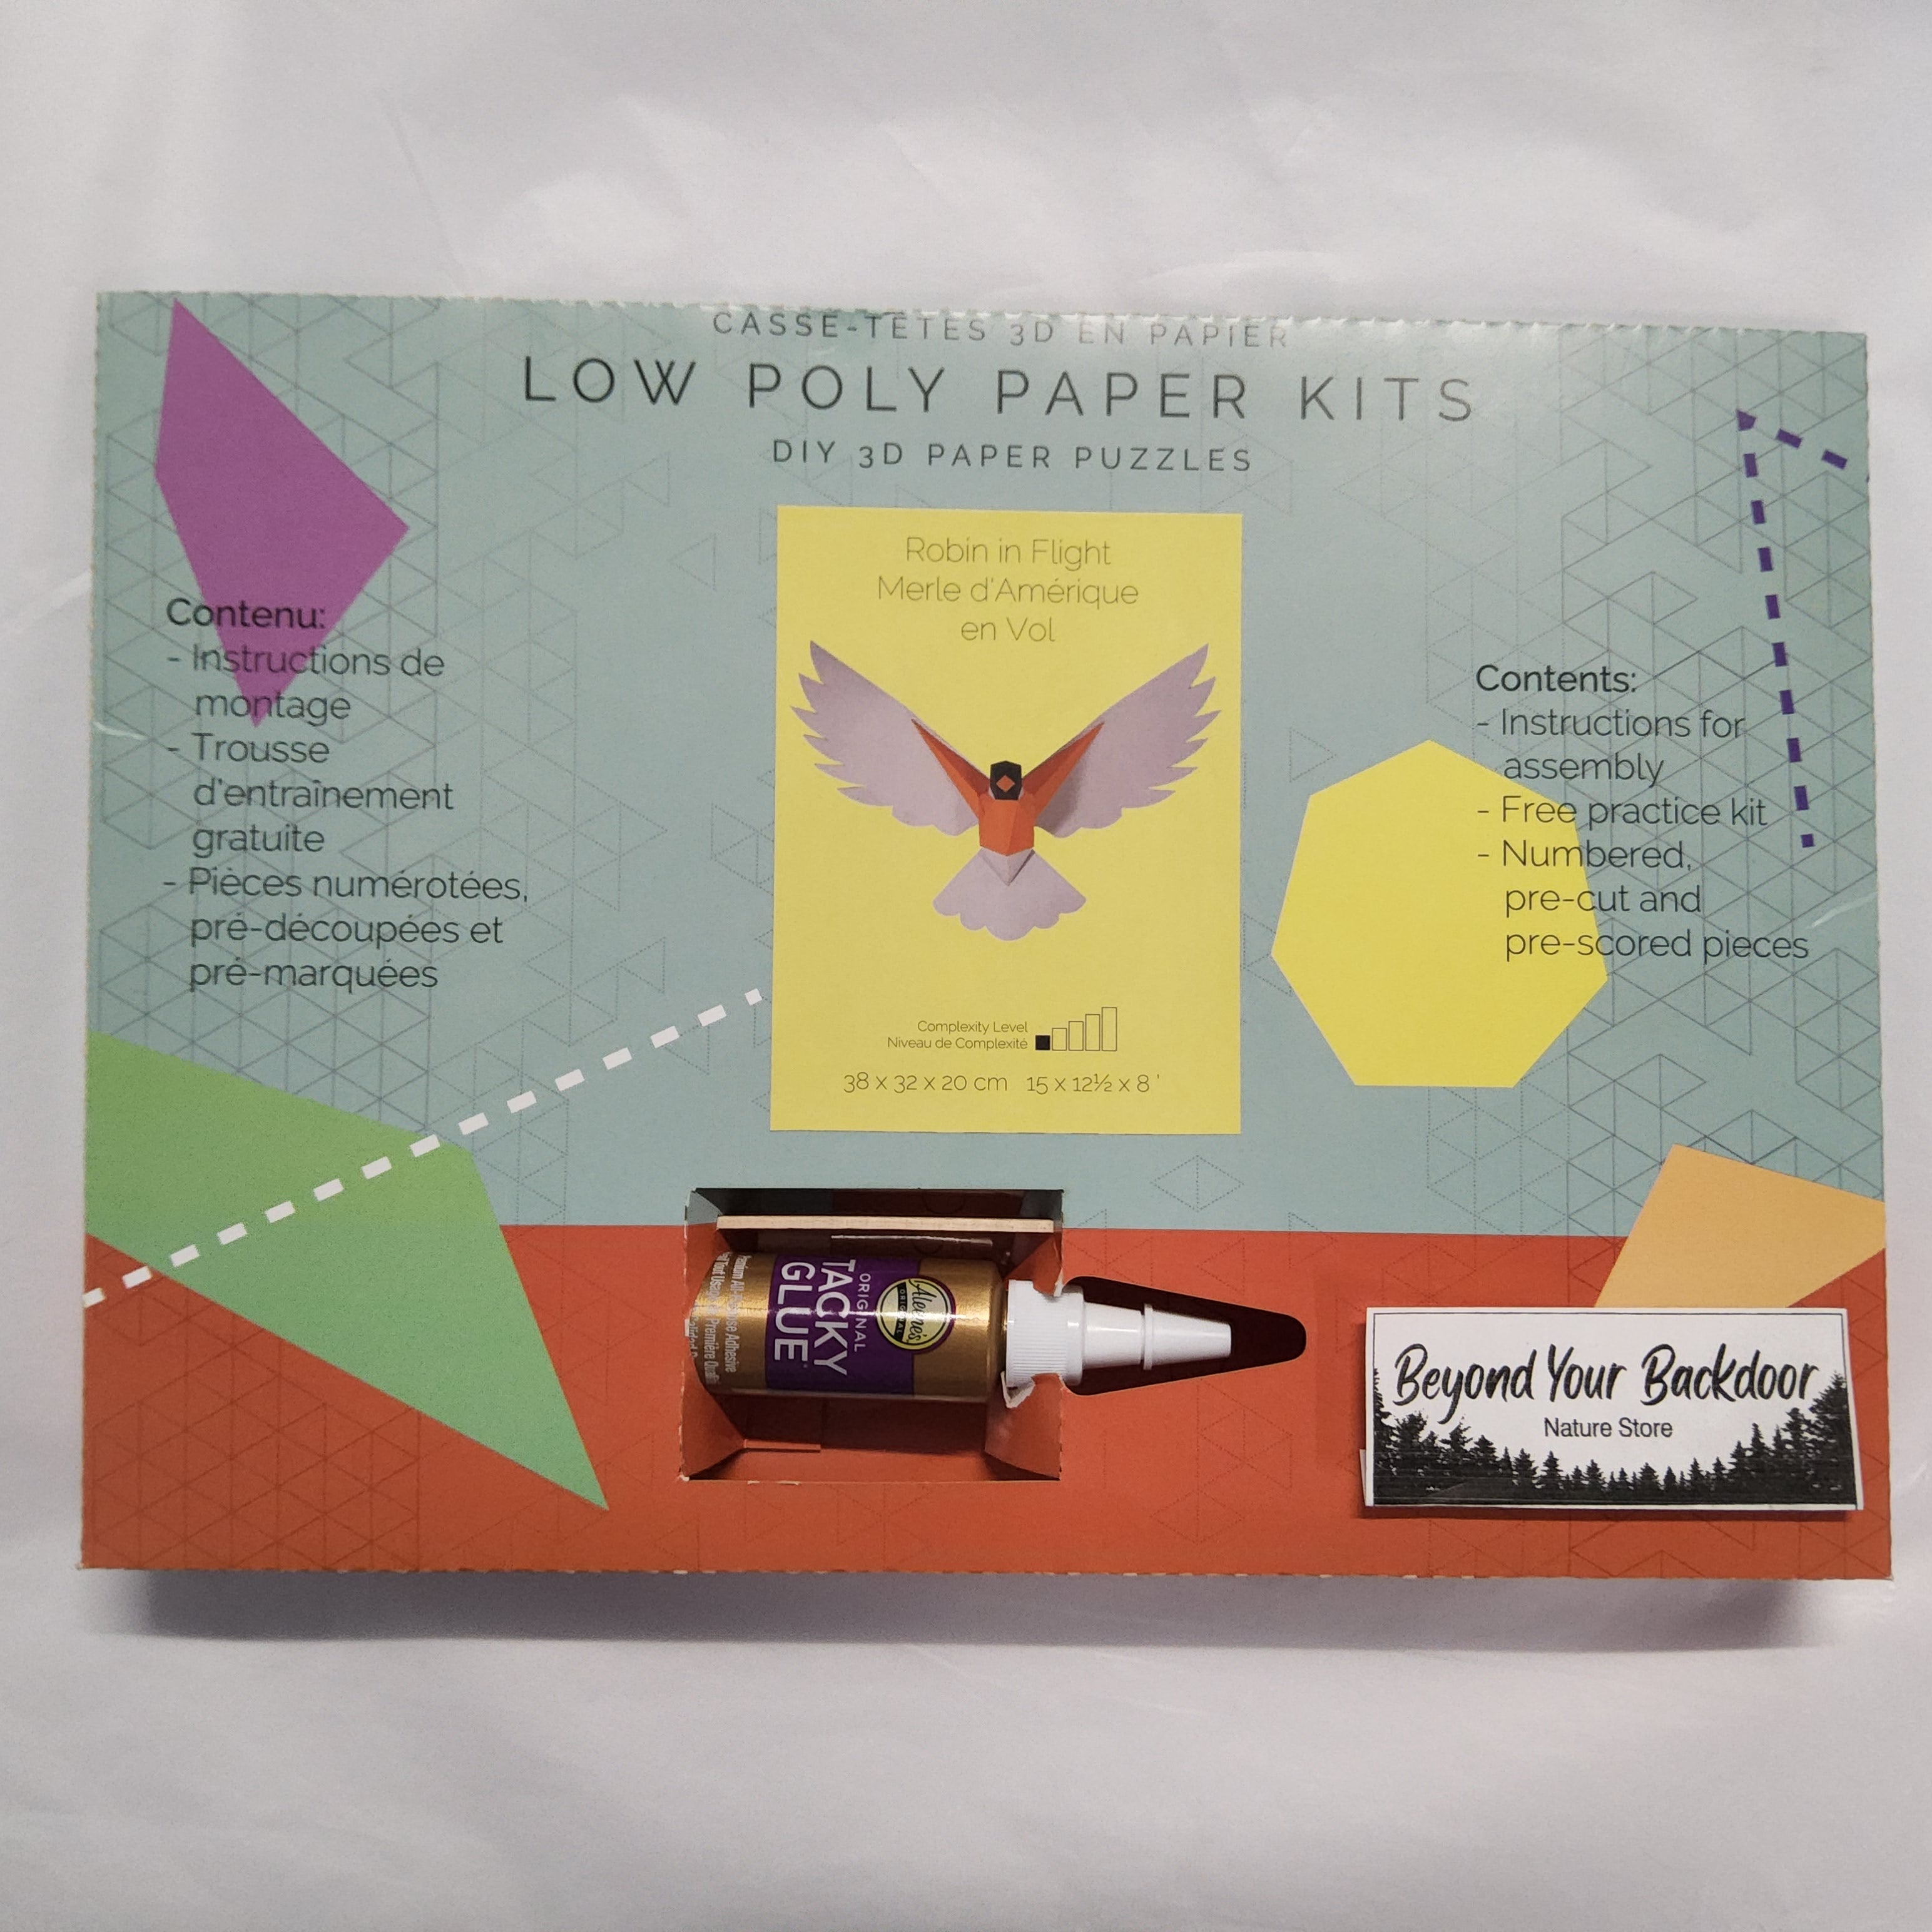 Low Poly Paper Kits - with glue and bamboo stick included - Song Birds in Flight - Assorted Designs